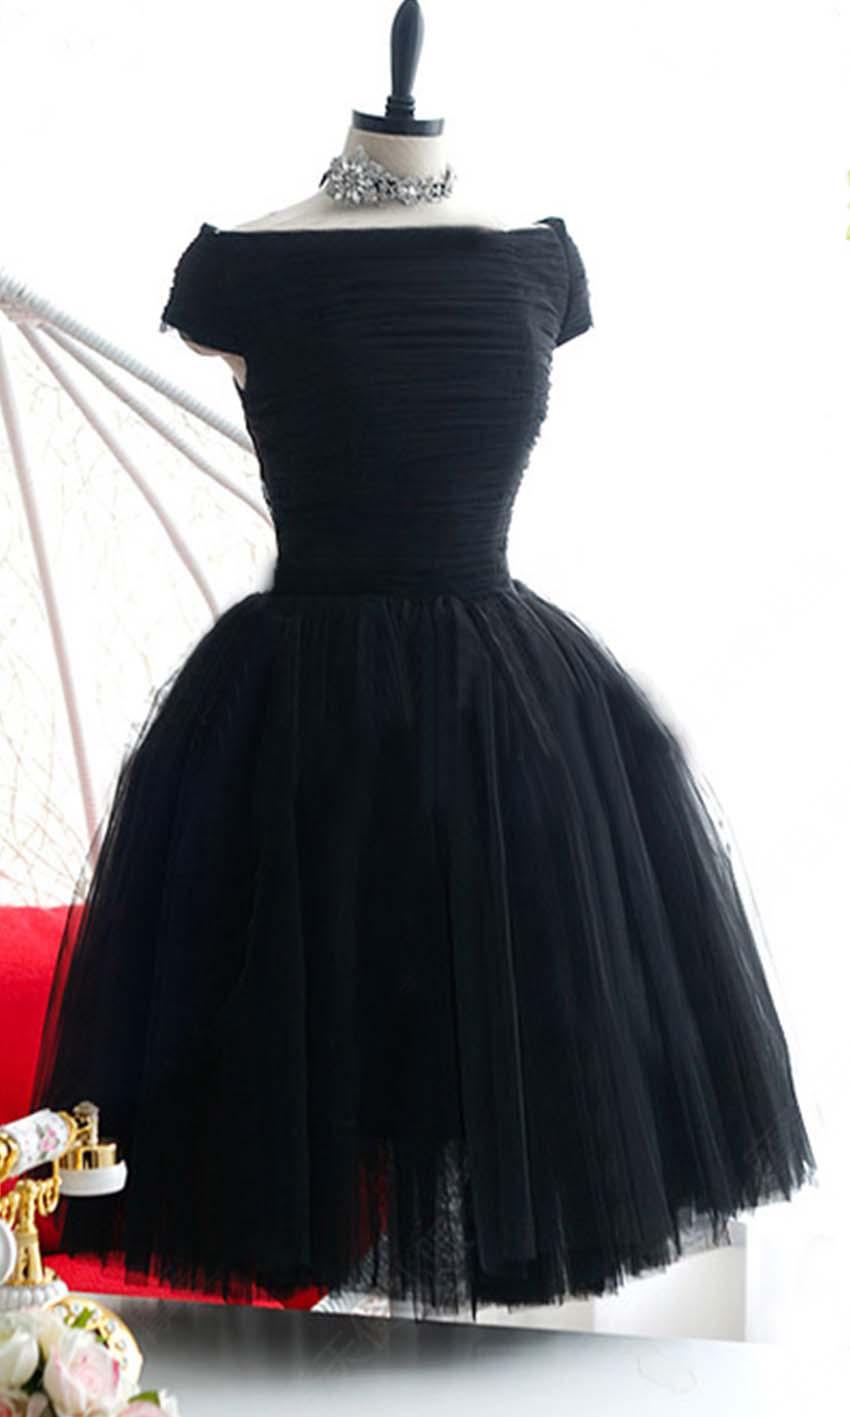 Mariage - Vintage Off The Shoulder Little Black Dress KSP352- £88.00 : Cheap Prom Dresses Uk, Bridesmaid Dresses, 2014 Prom & Evening Dresses, Look for cheap elegant prom dresses 2014, cocktail gowns, or dresses for special occasions? kissprom.co.uk offers various 